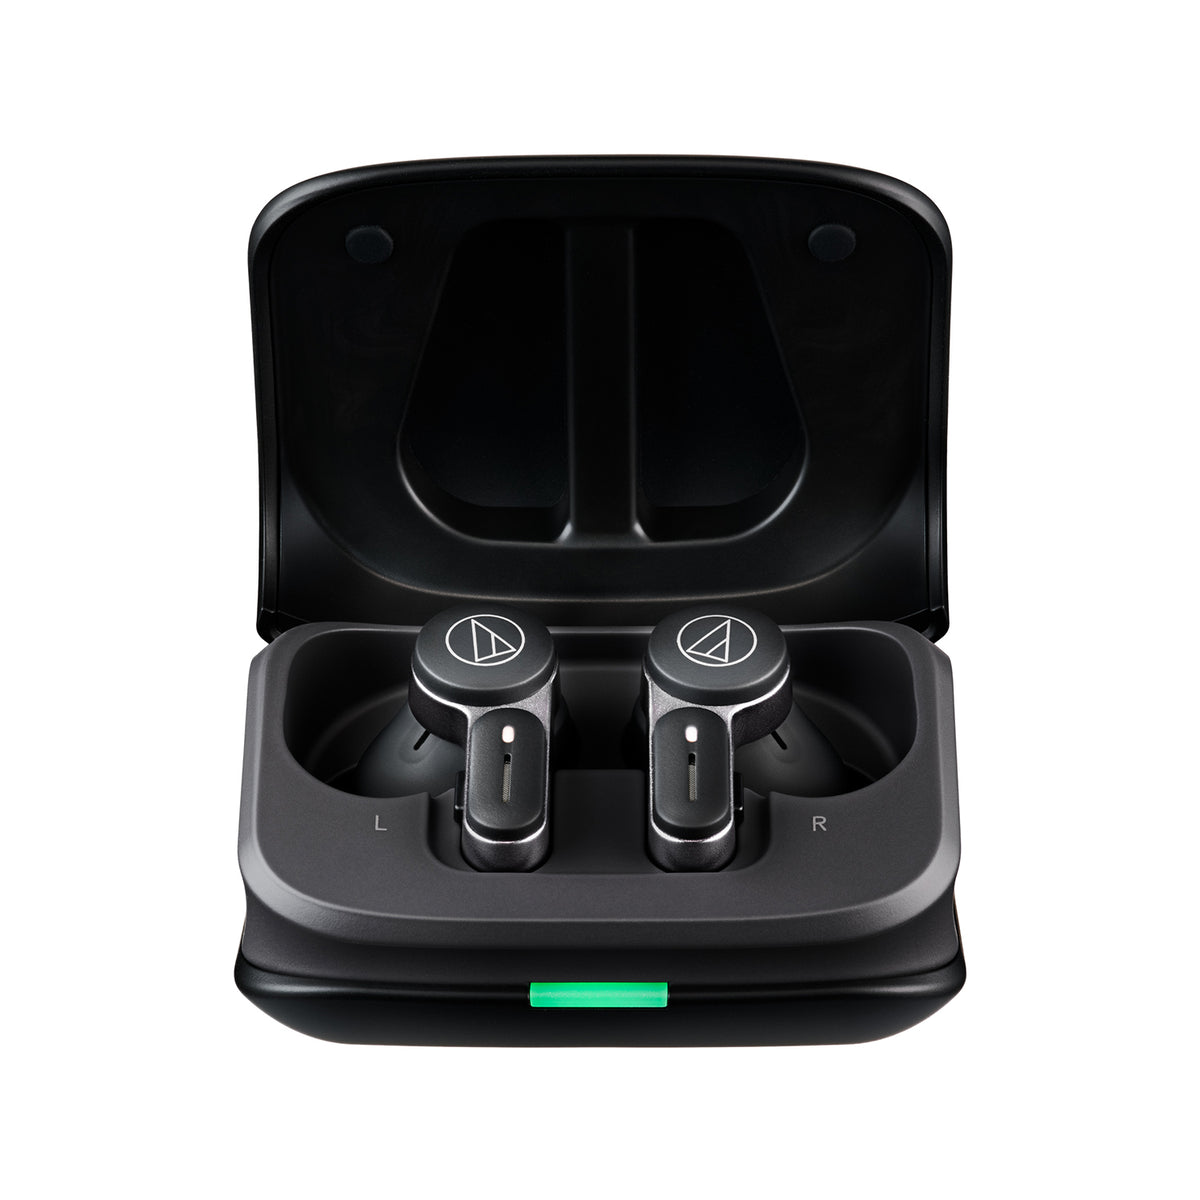 Audio-Technica ATH-TWX7 True Wireless Earbuds with Digital Hybrid Noise Cancelling